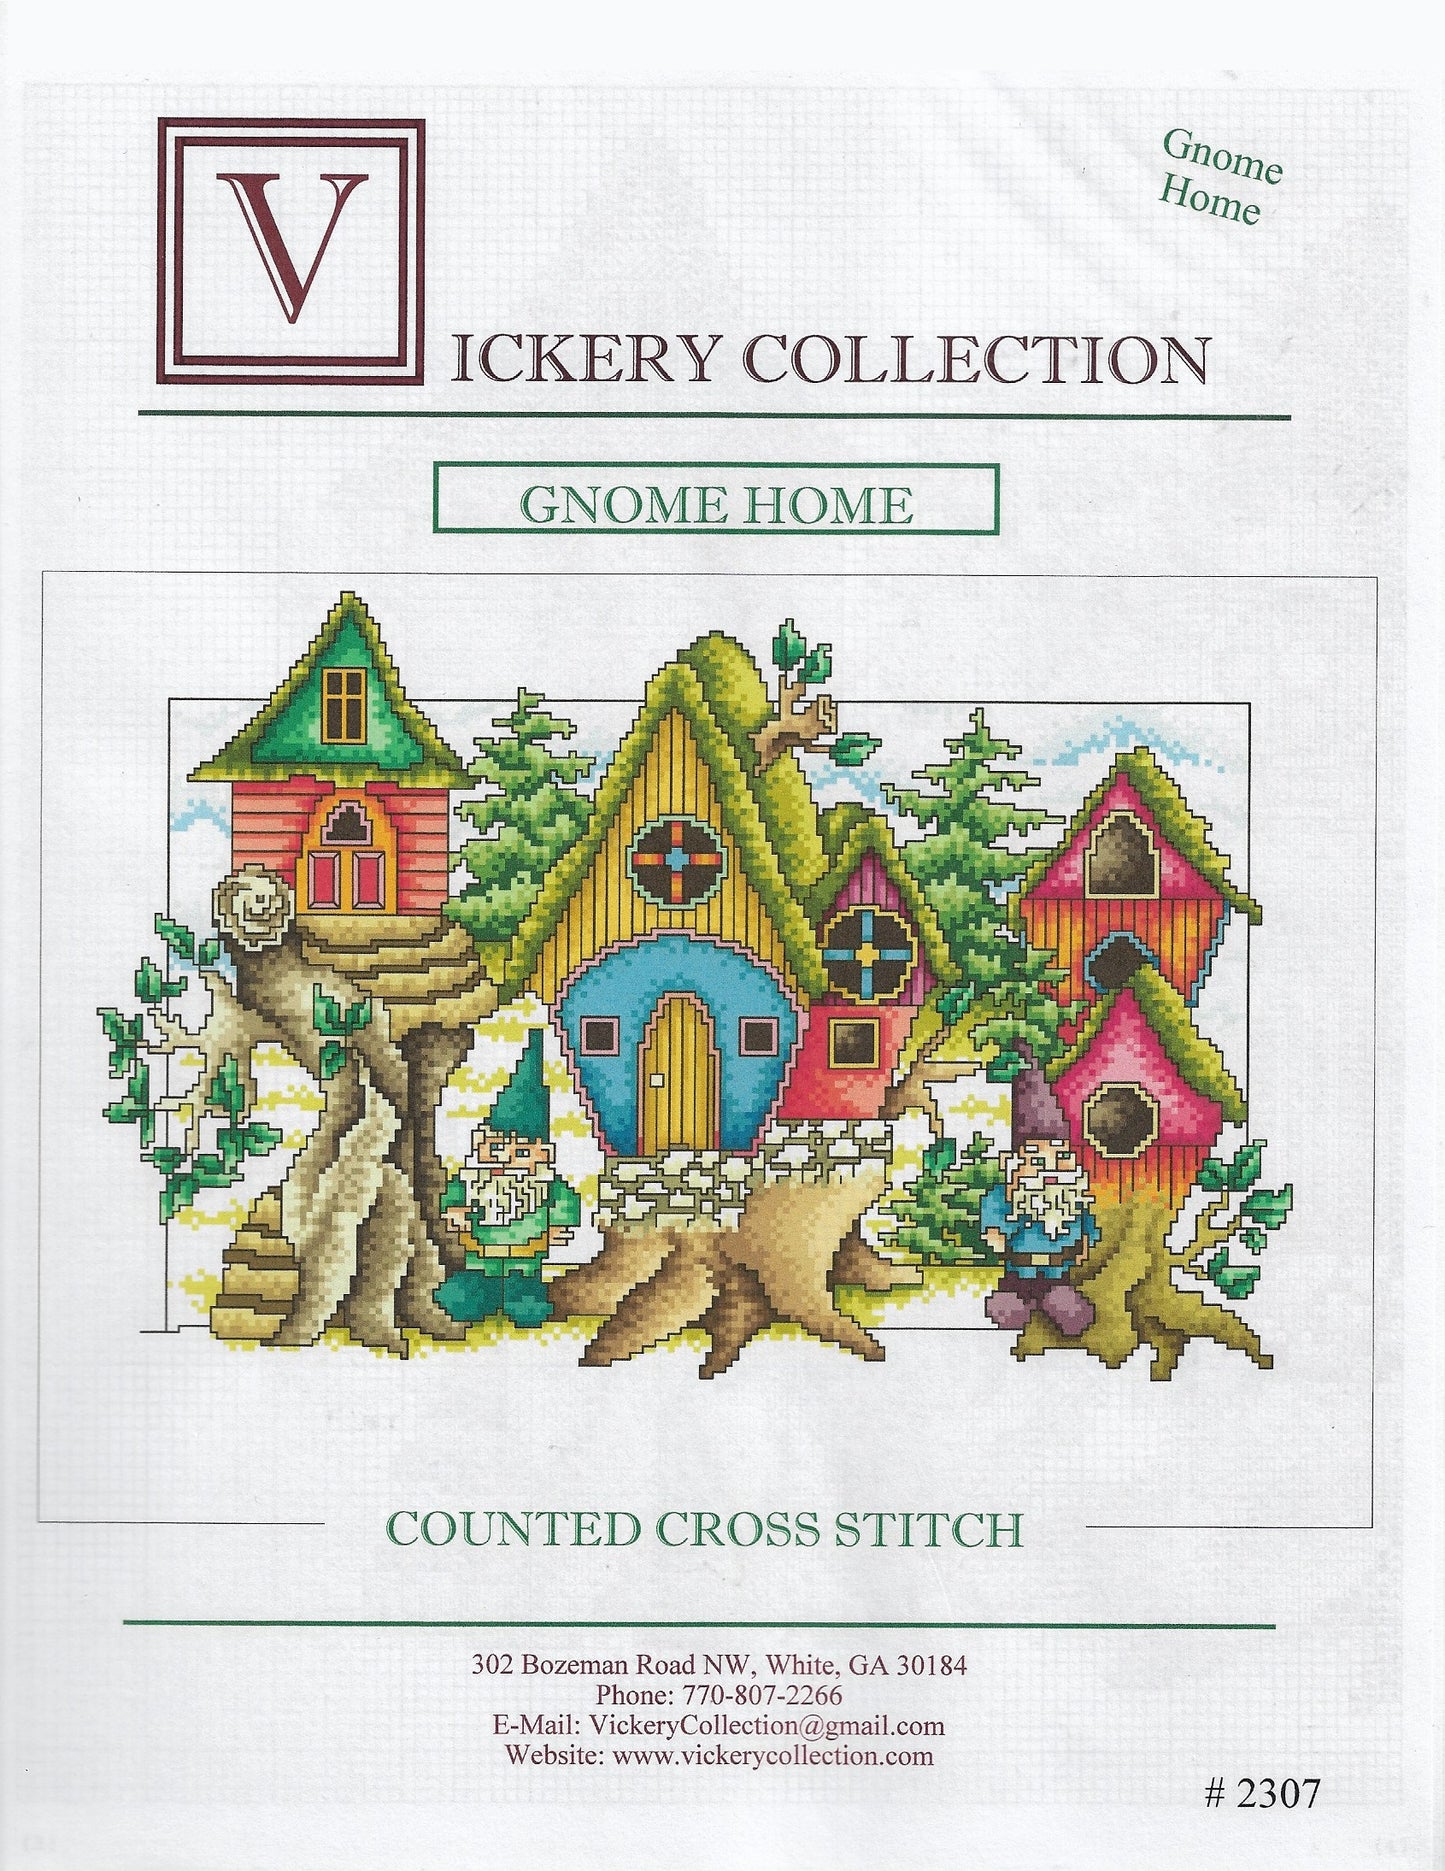 Vickery Collection Gnome Home cross stitch pattern